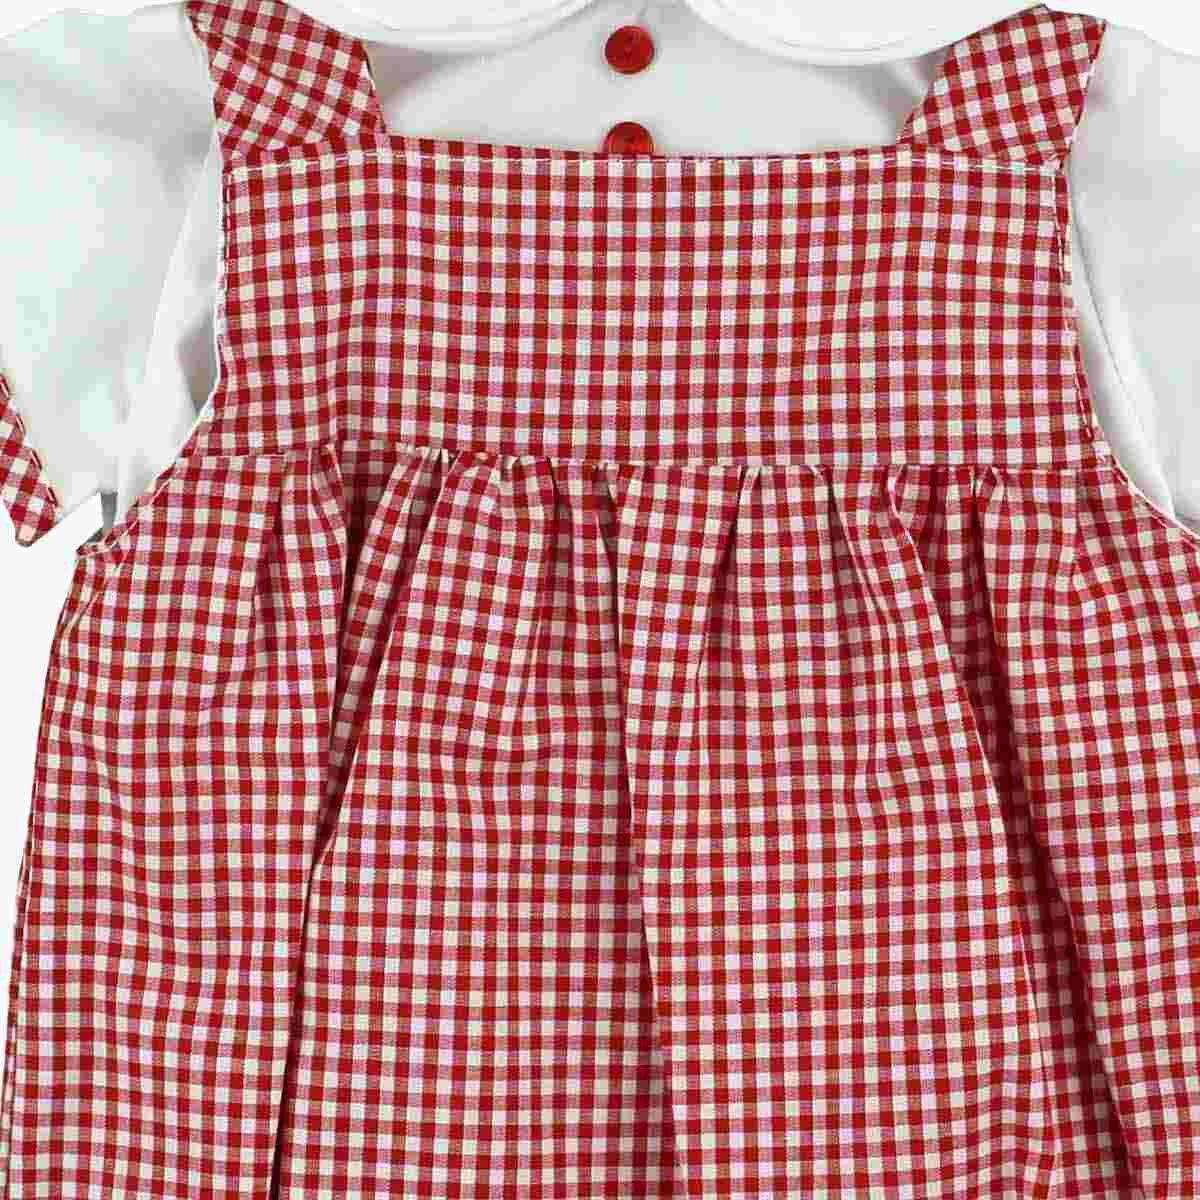 SHIRT AND CHECK RED ROMPER BABYFERR - 2